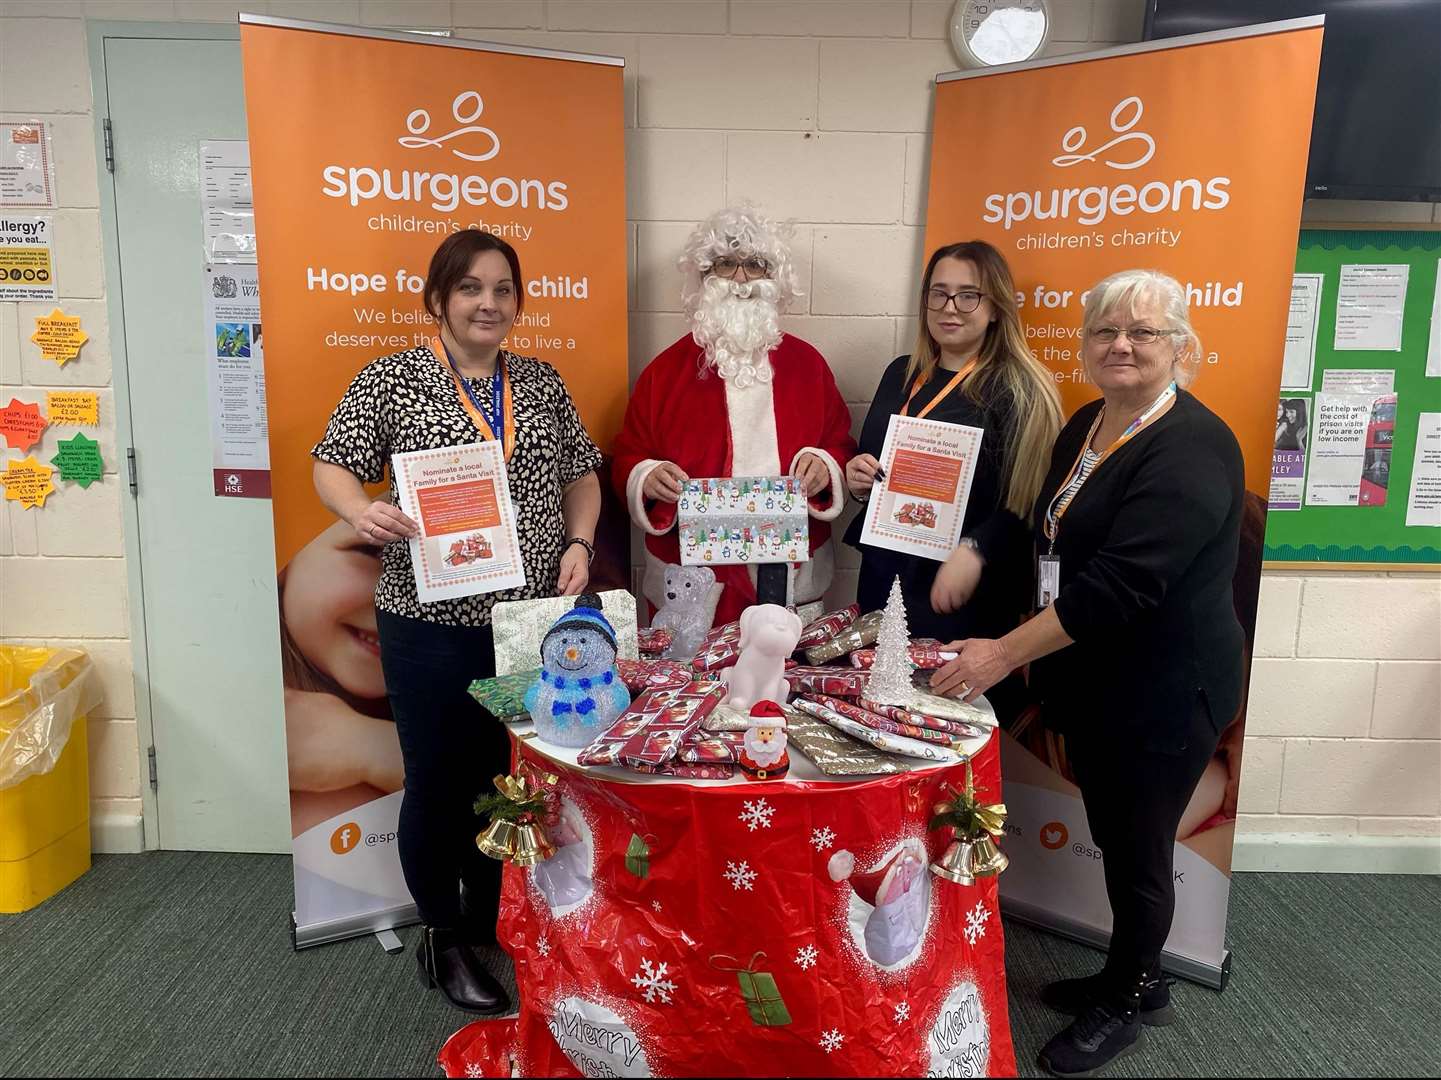 Lisa Langworthy, Emma Allcorn and Pauline Neal with Linda Jeacock dressed as Santa, of children’s charity Spurgeons, who are offering free visits to families having a hard time